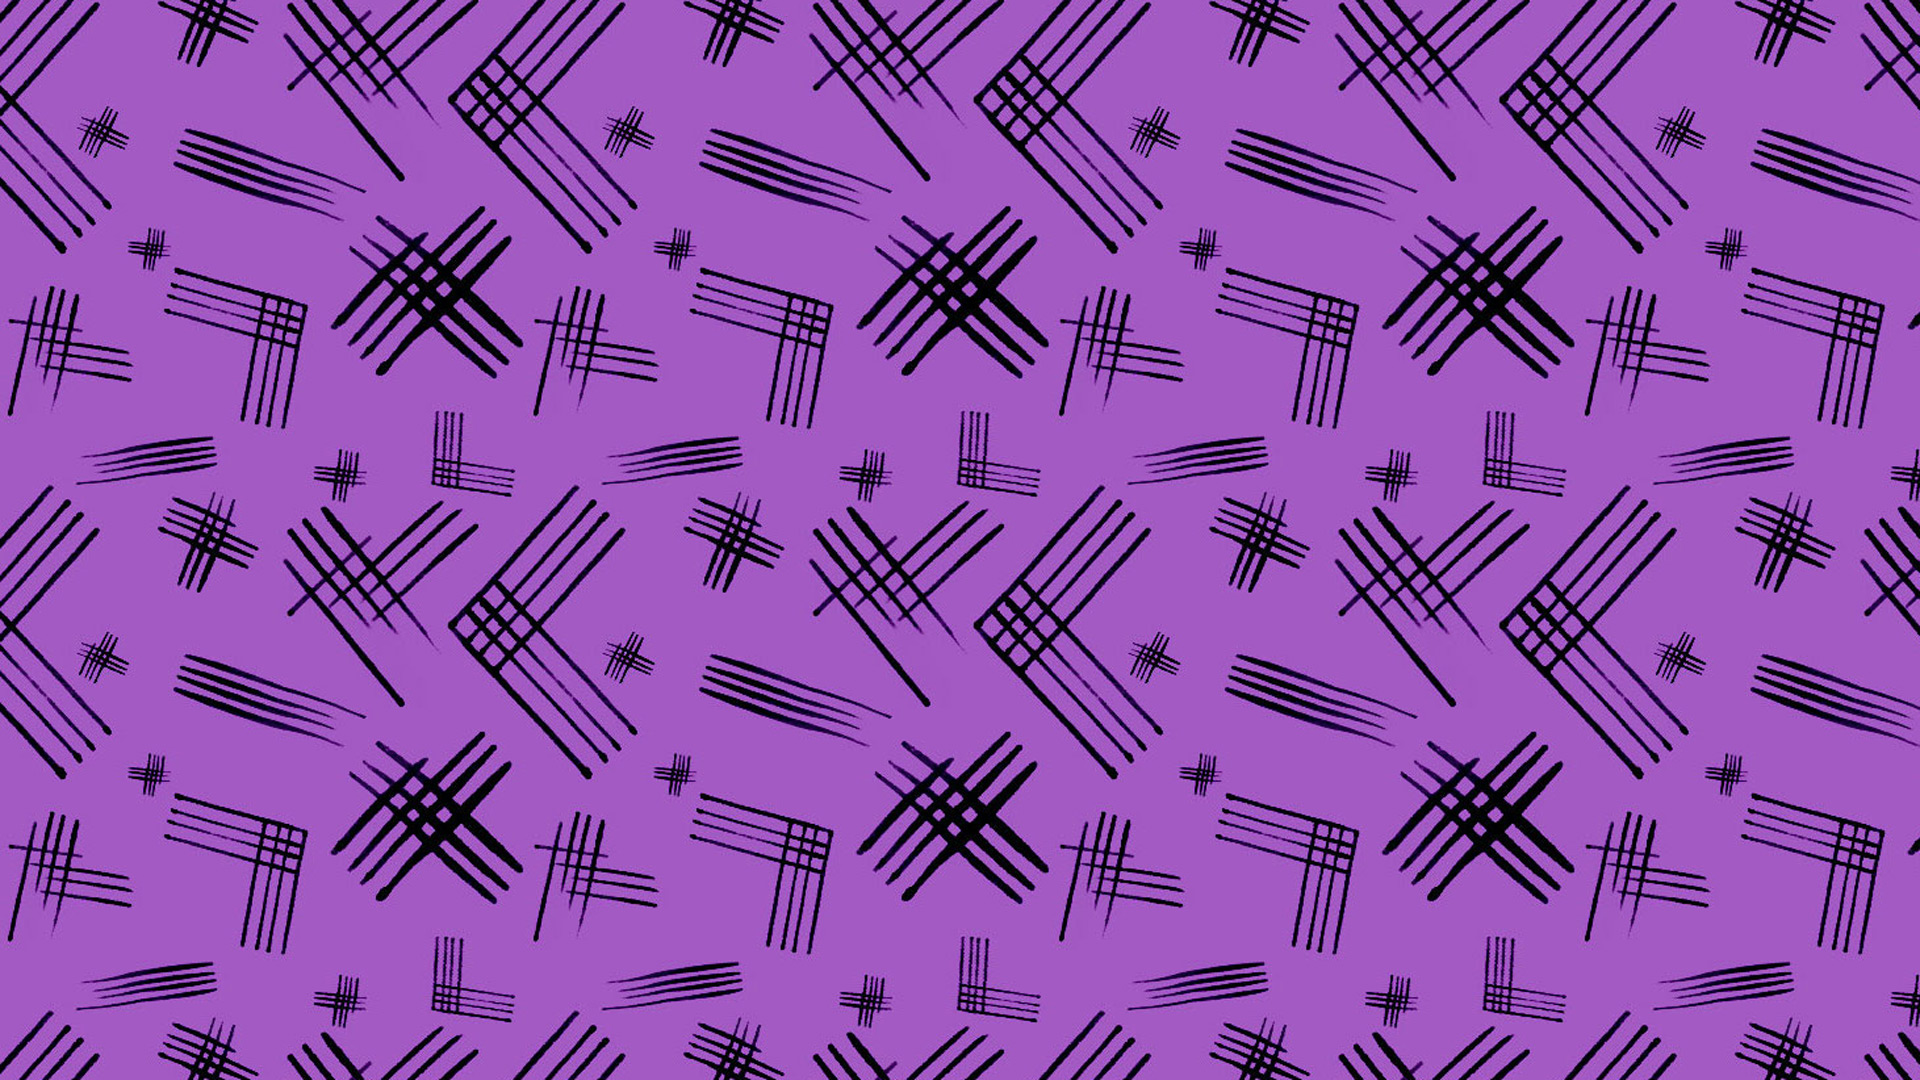 The surface pattern design features a vibrant purple background with abstract and high contrast elements of crosses, hatches, and lines.